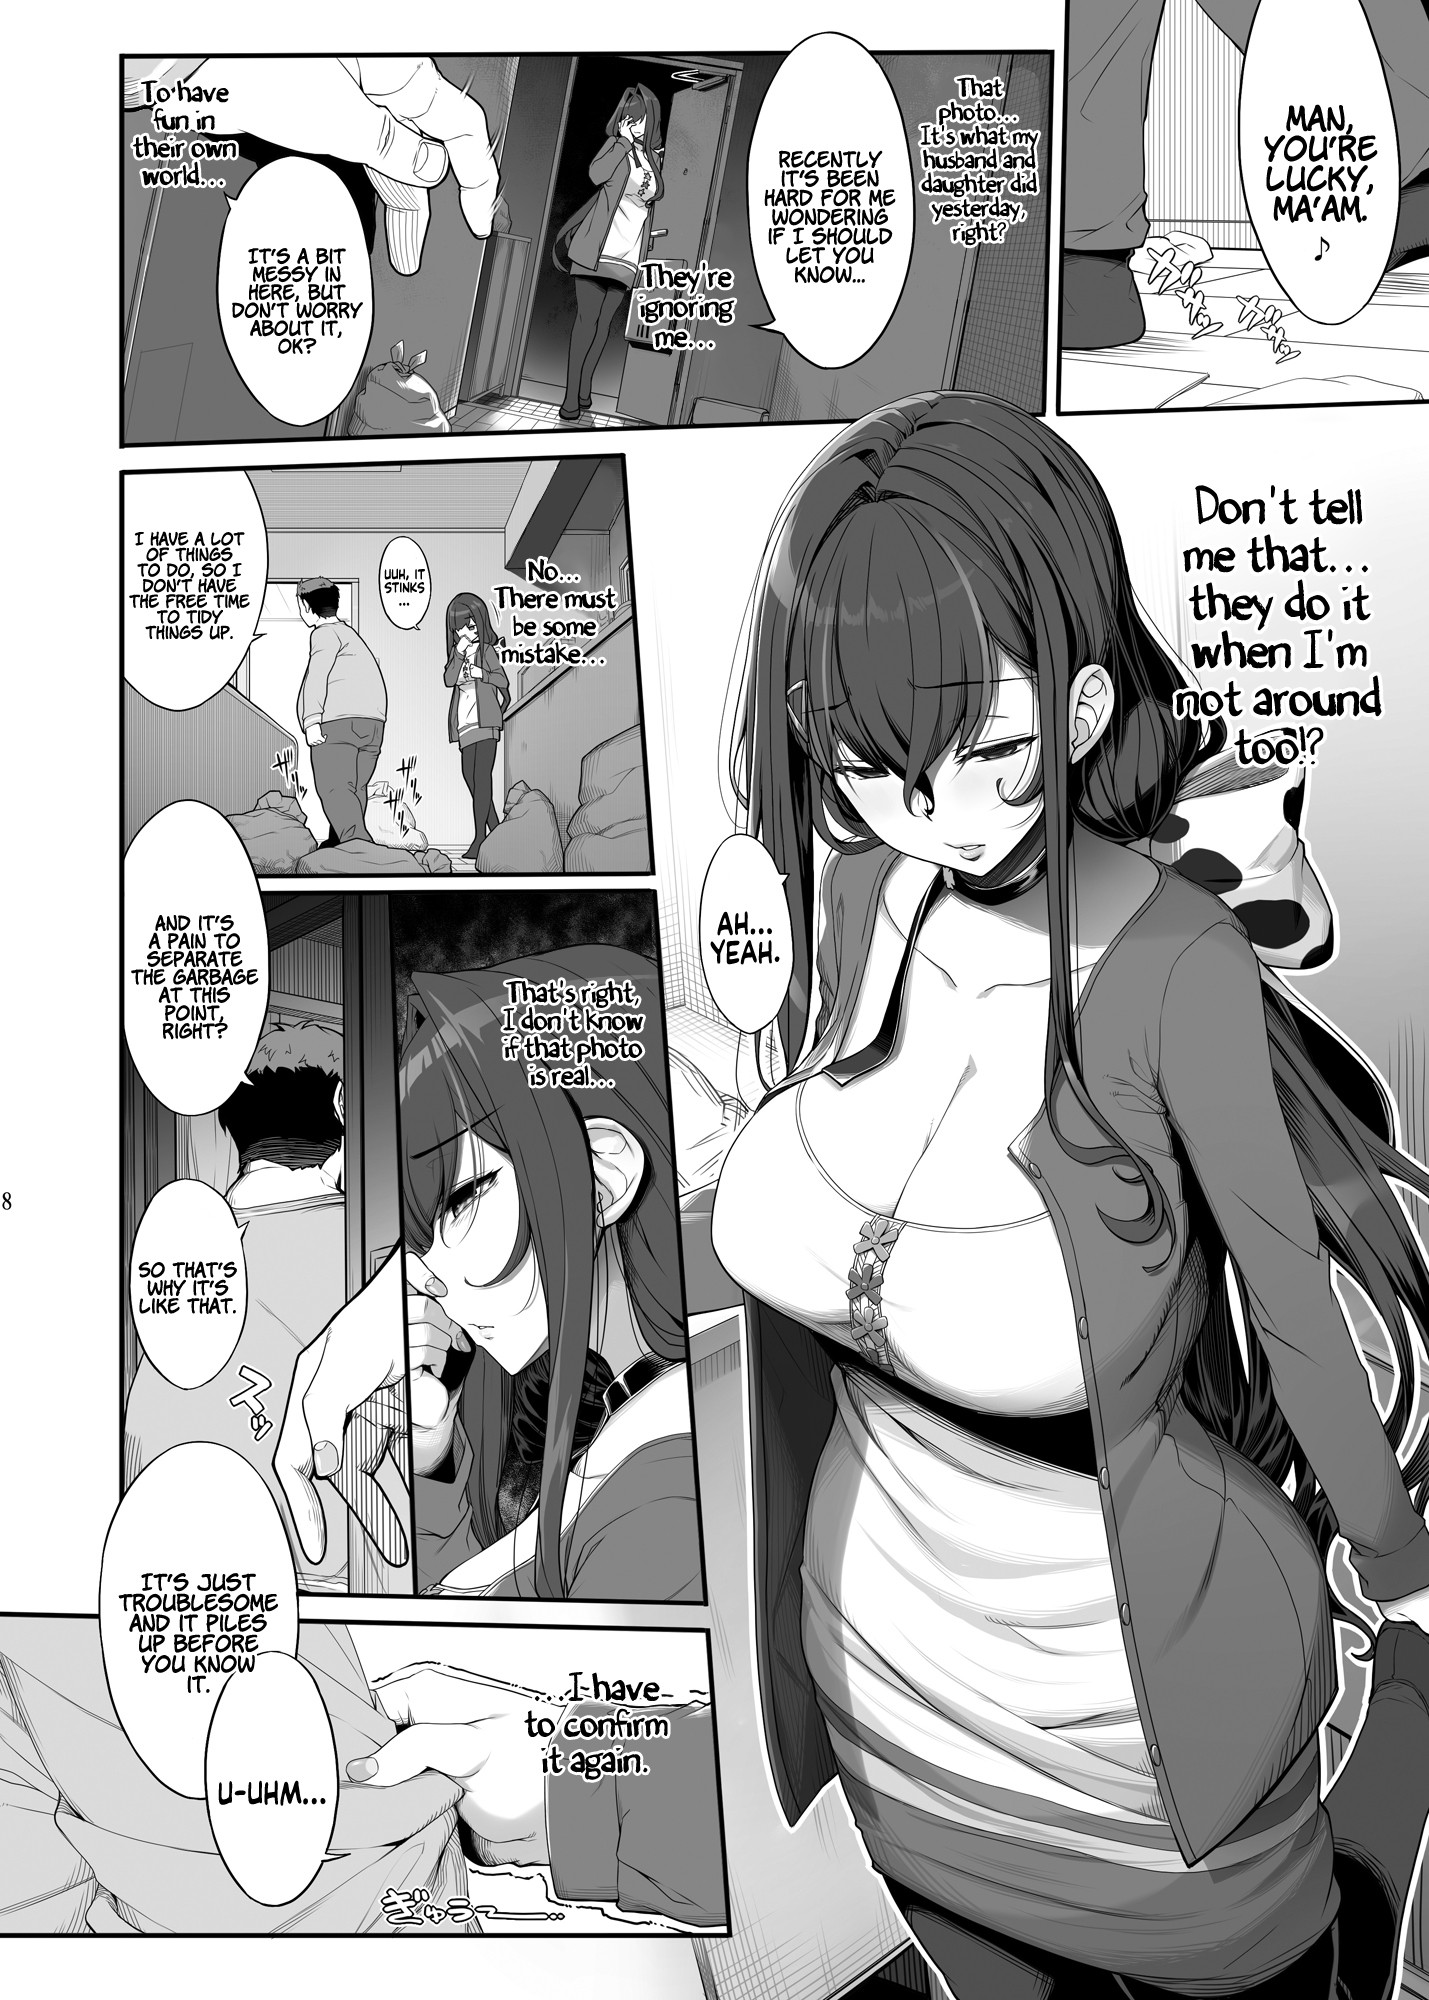 Page 7 Horny Old Man and Cheating Sex with a Wife - Original Hentai Doujinshi by Kirintei pic